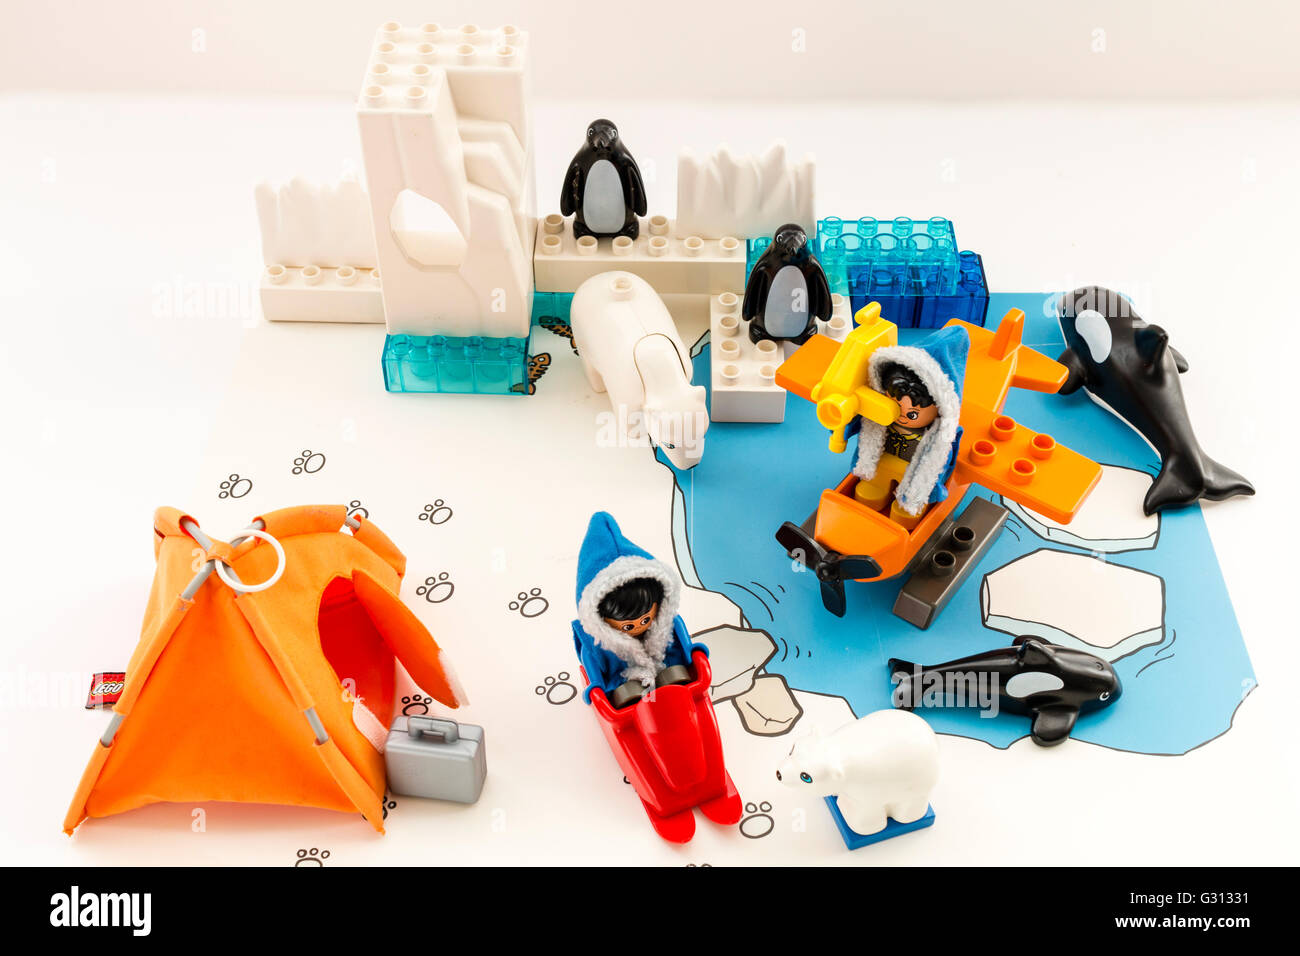 Lego duplo explore Arctic playset. High angle looking down at base camp on  the ice with lego people, seaplane, penguins and polar bears Stock Photo -  Alamy